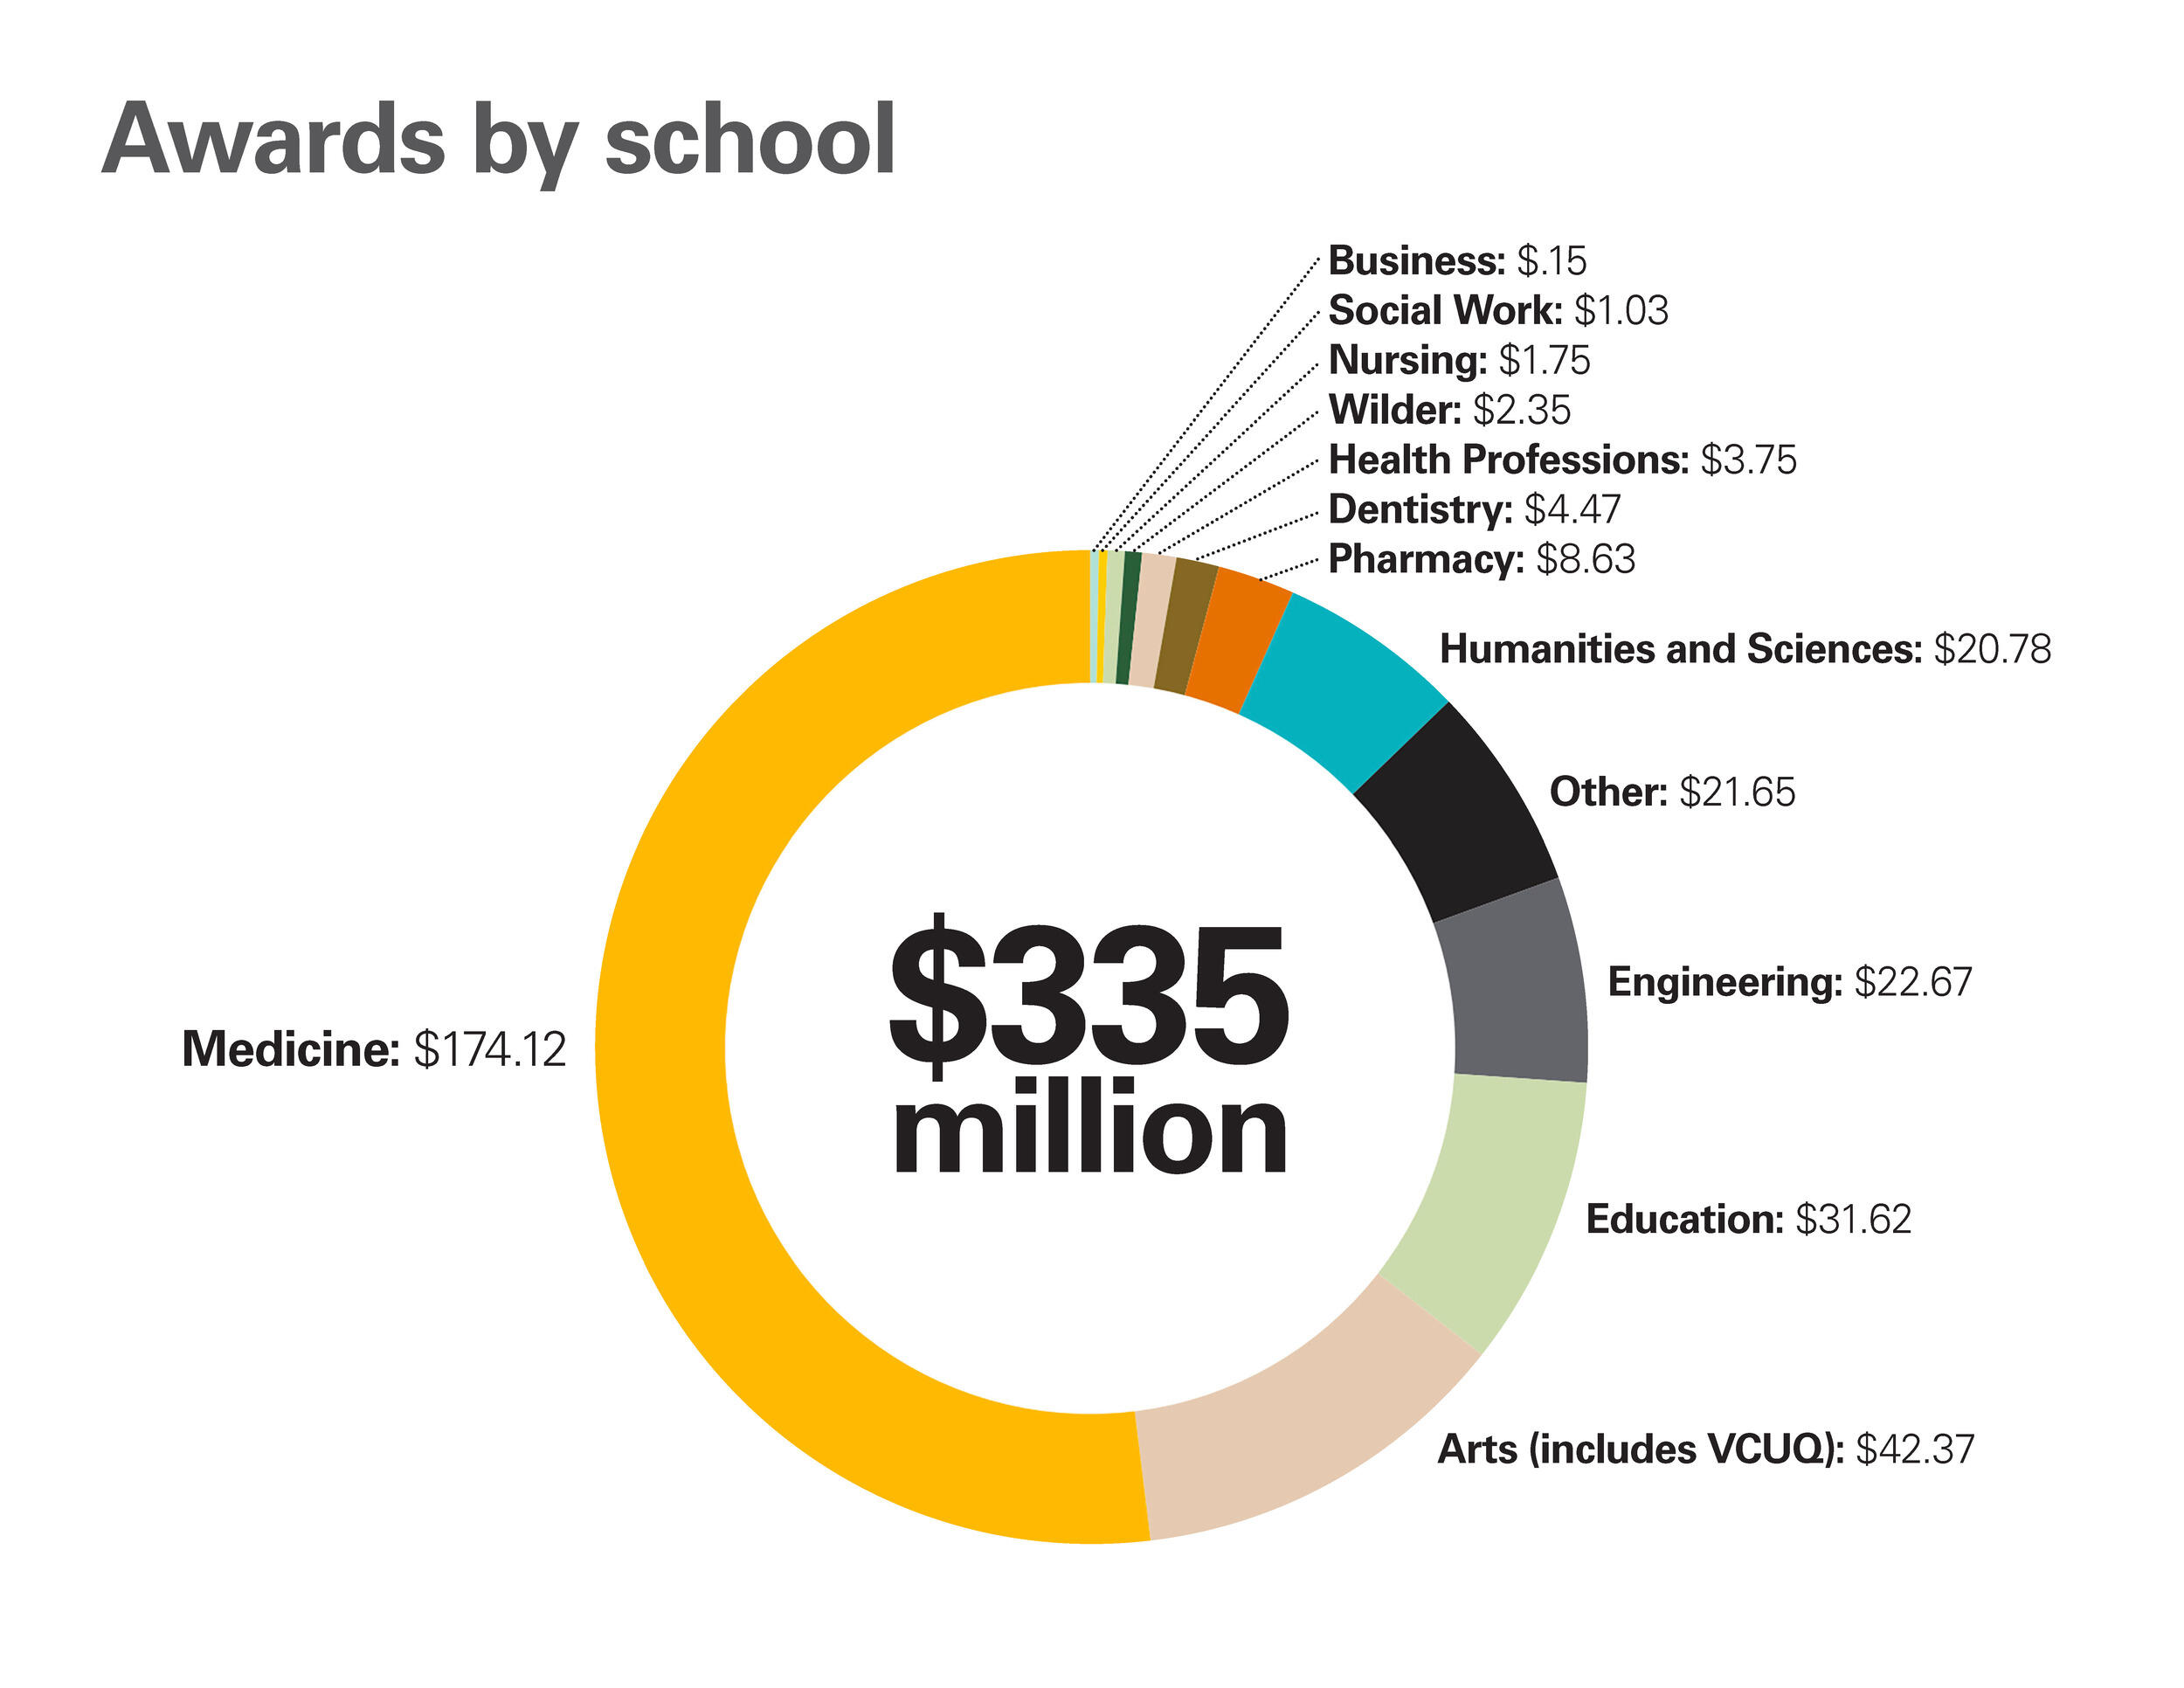 A chart depicting the breakdown of awards by schools and colleges at V C U.